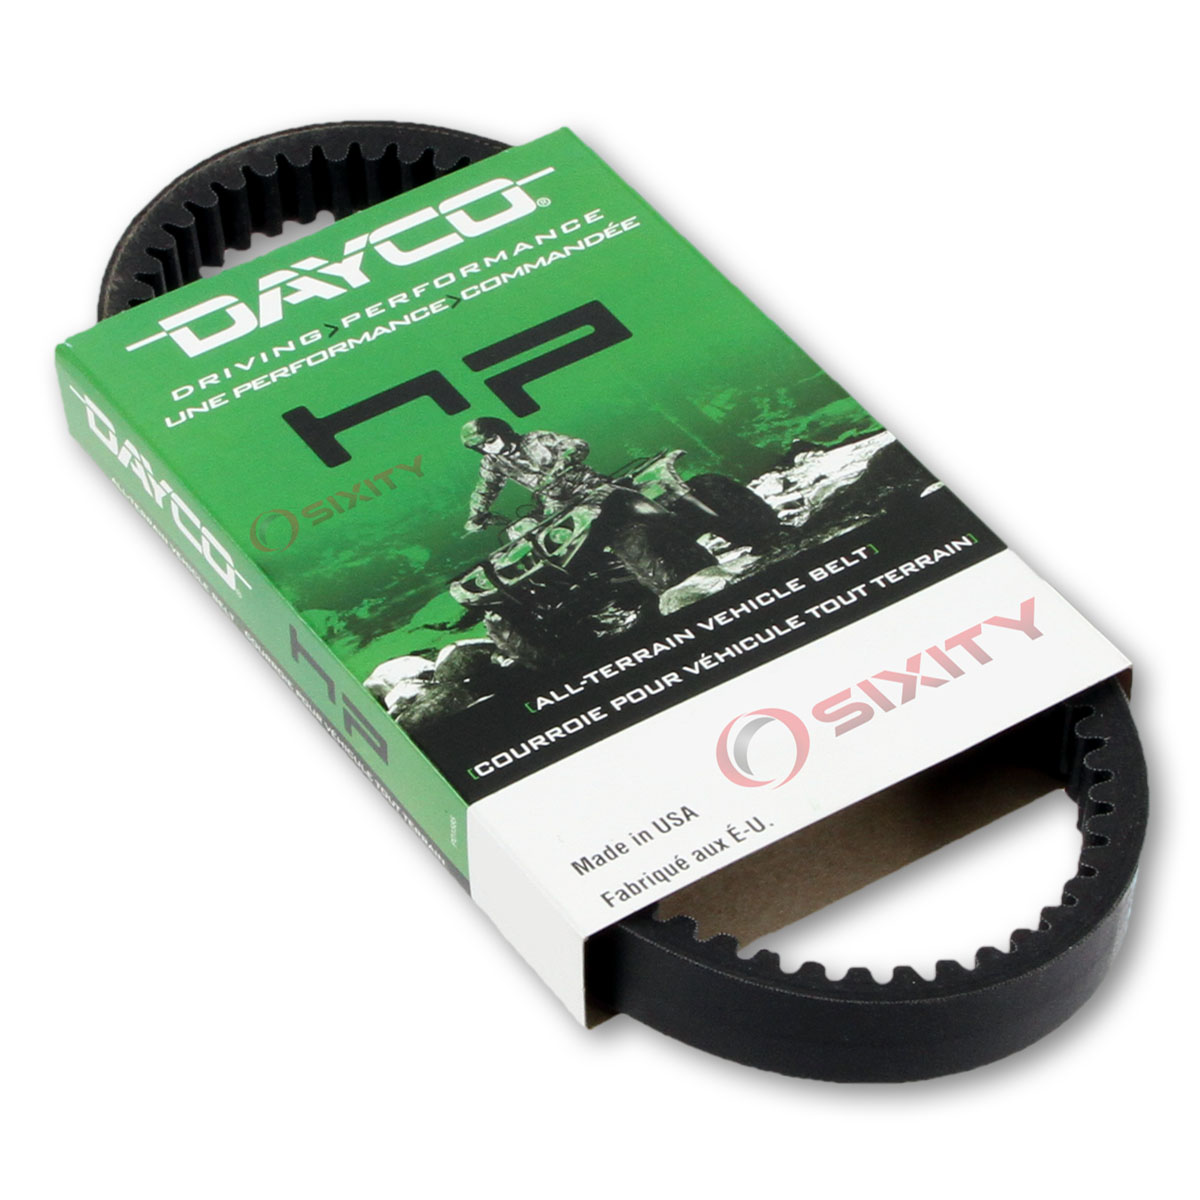 Dayco HP Drive Belt for 2005-2006 Arctic Cat 400 4x4 VP - High Performance